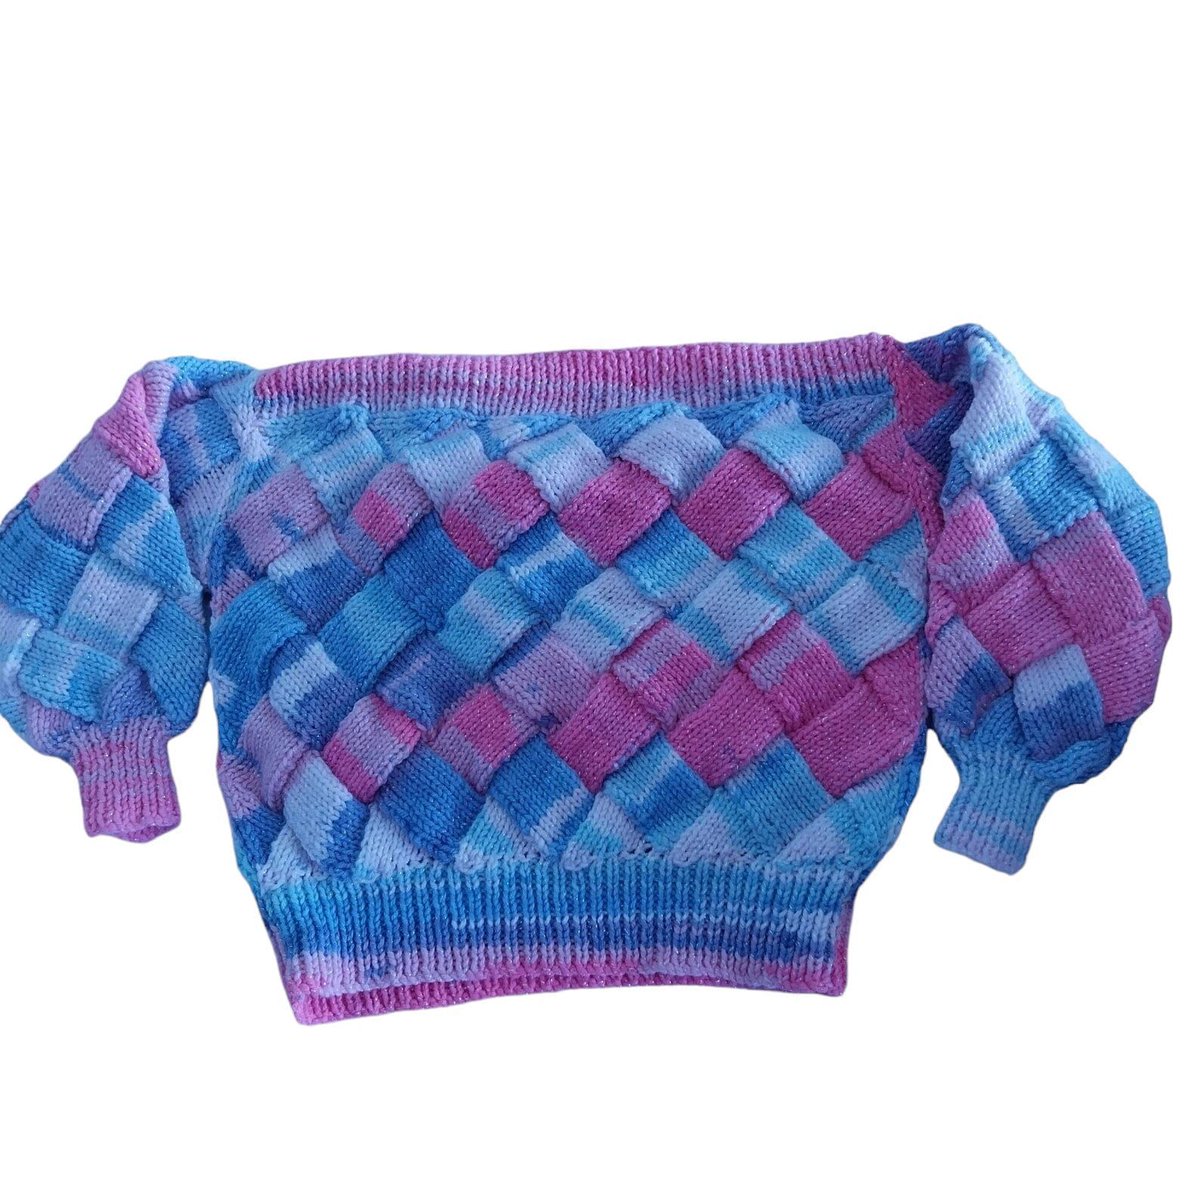 Add a hint of sparkle to your little one's wardrobe with this hand-knitted baby jumper. The pink and blue entrelac design is sure to make them stand out. Perfect for ages 2-3 years. Shop now on #Etsy knittingtopia.etsy.com/listing/168501… #knittingtopia #handmade #craftbizparty #tweetuk #MHHSBD